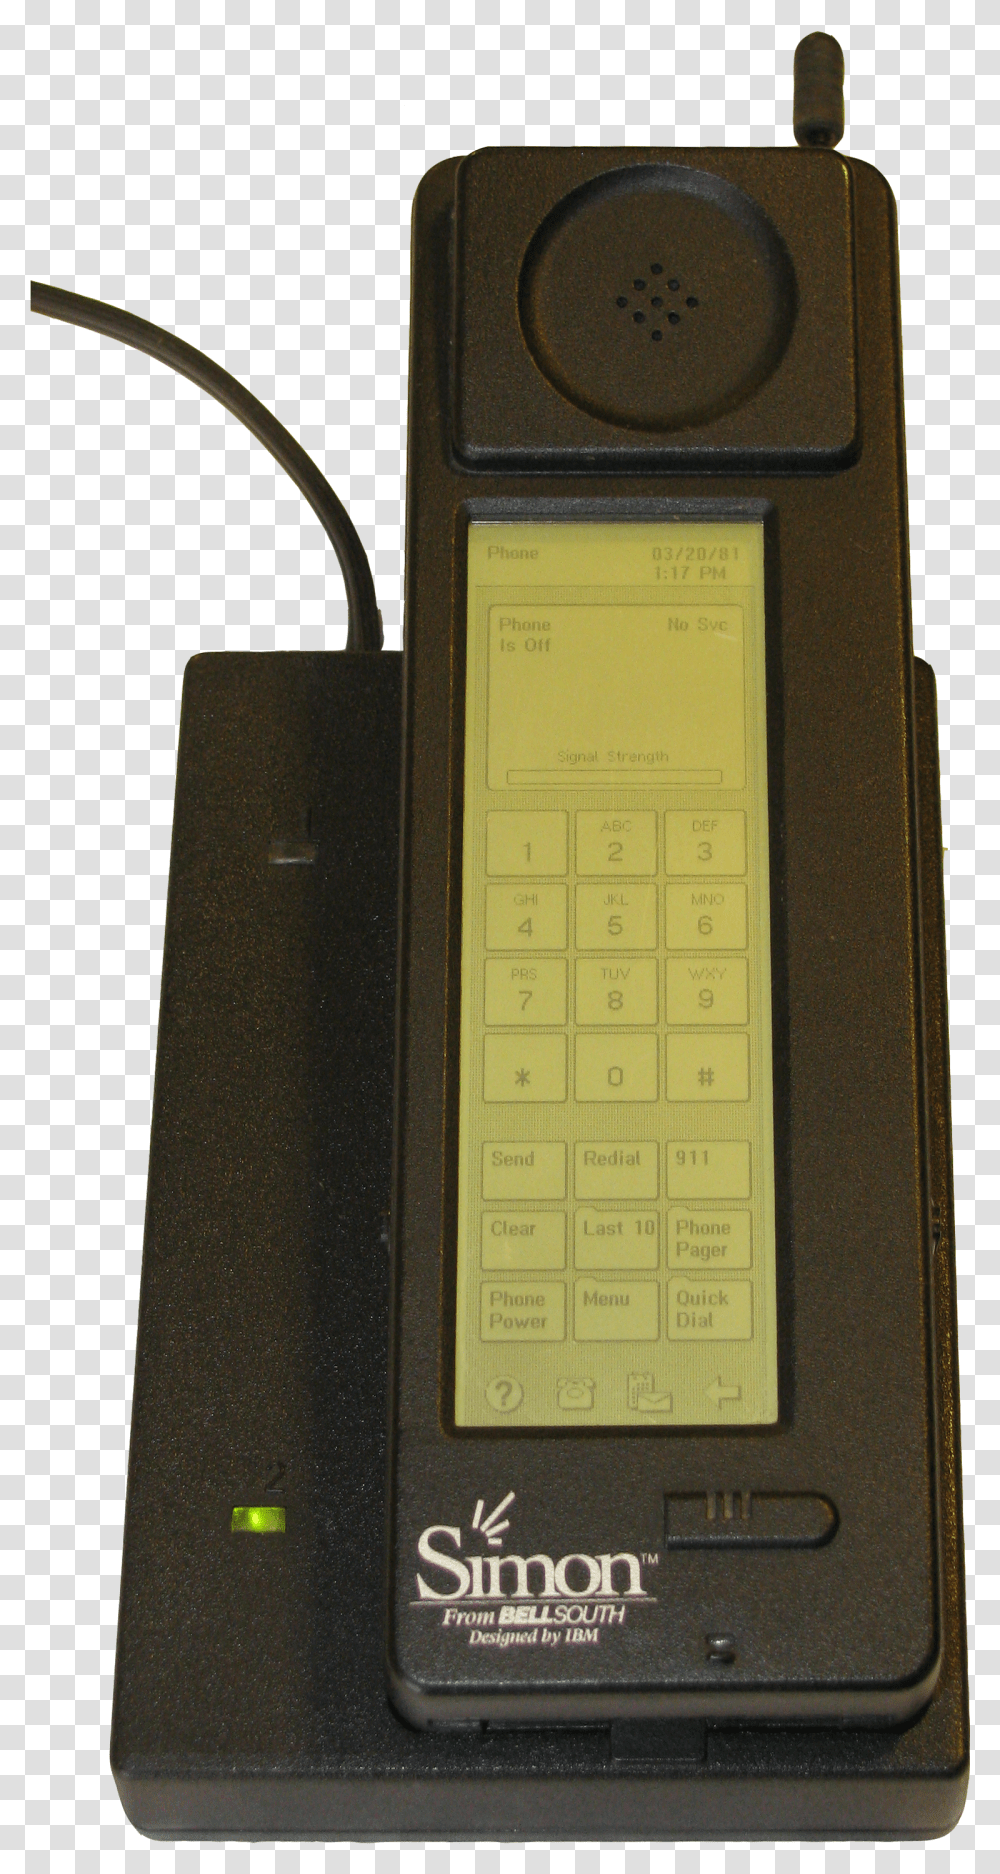 Photograph Of The Simon Personal Communicator Shown Transparent Png